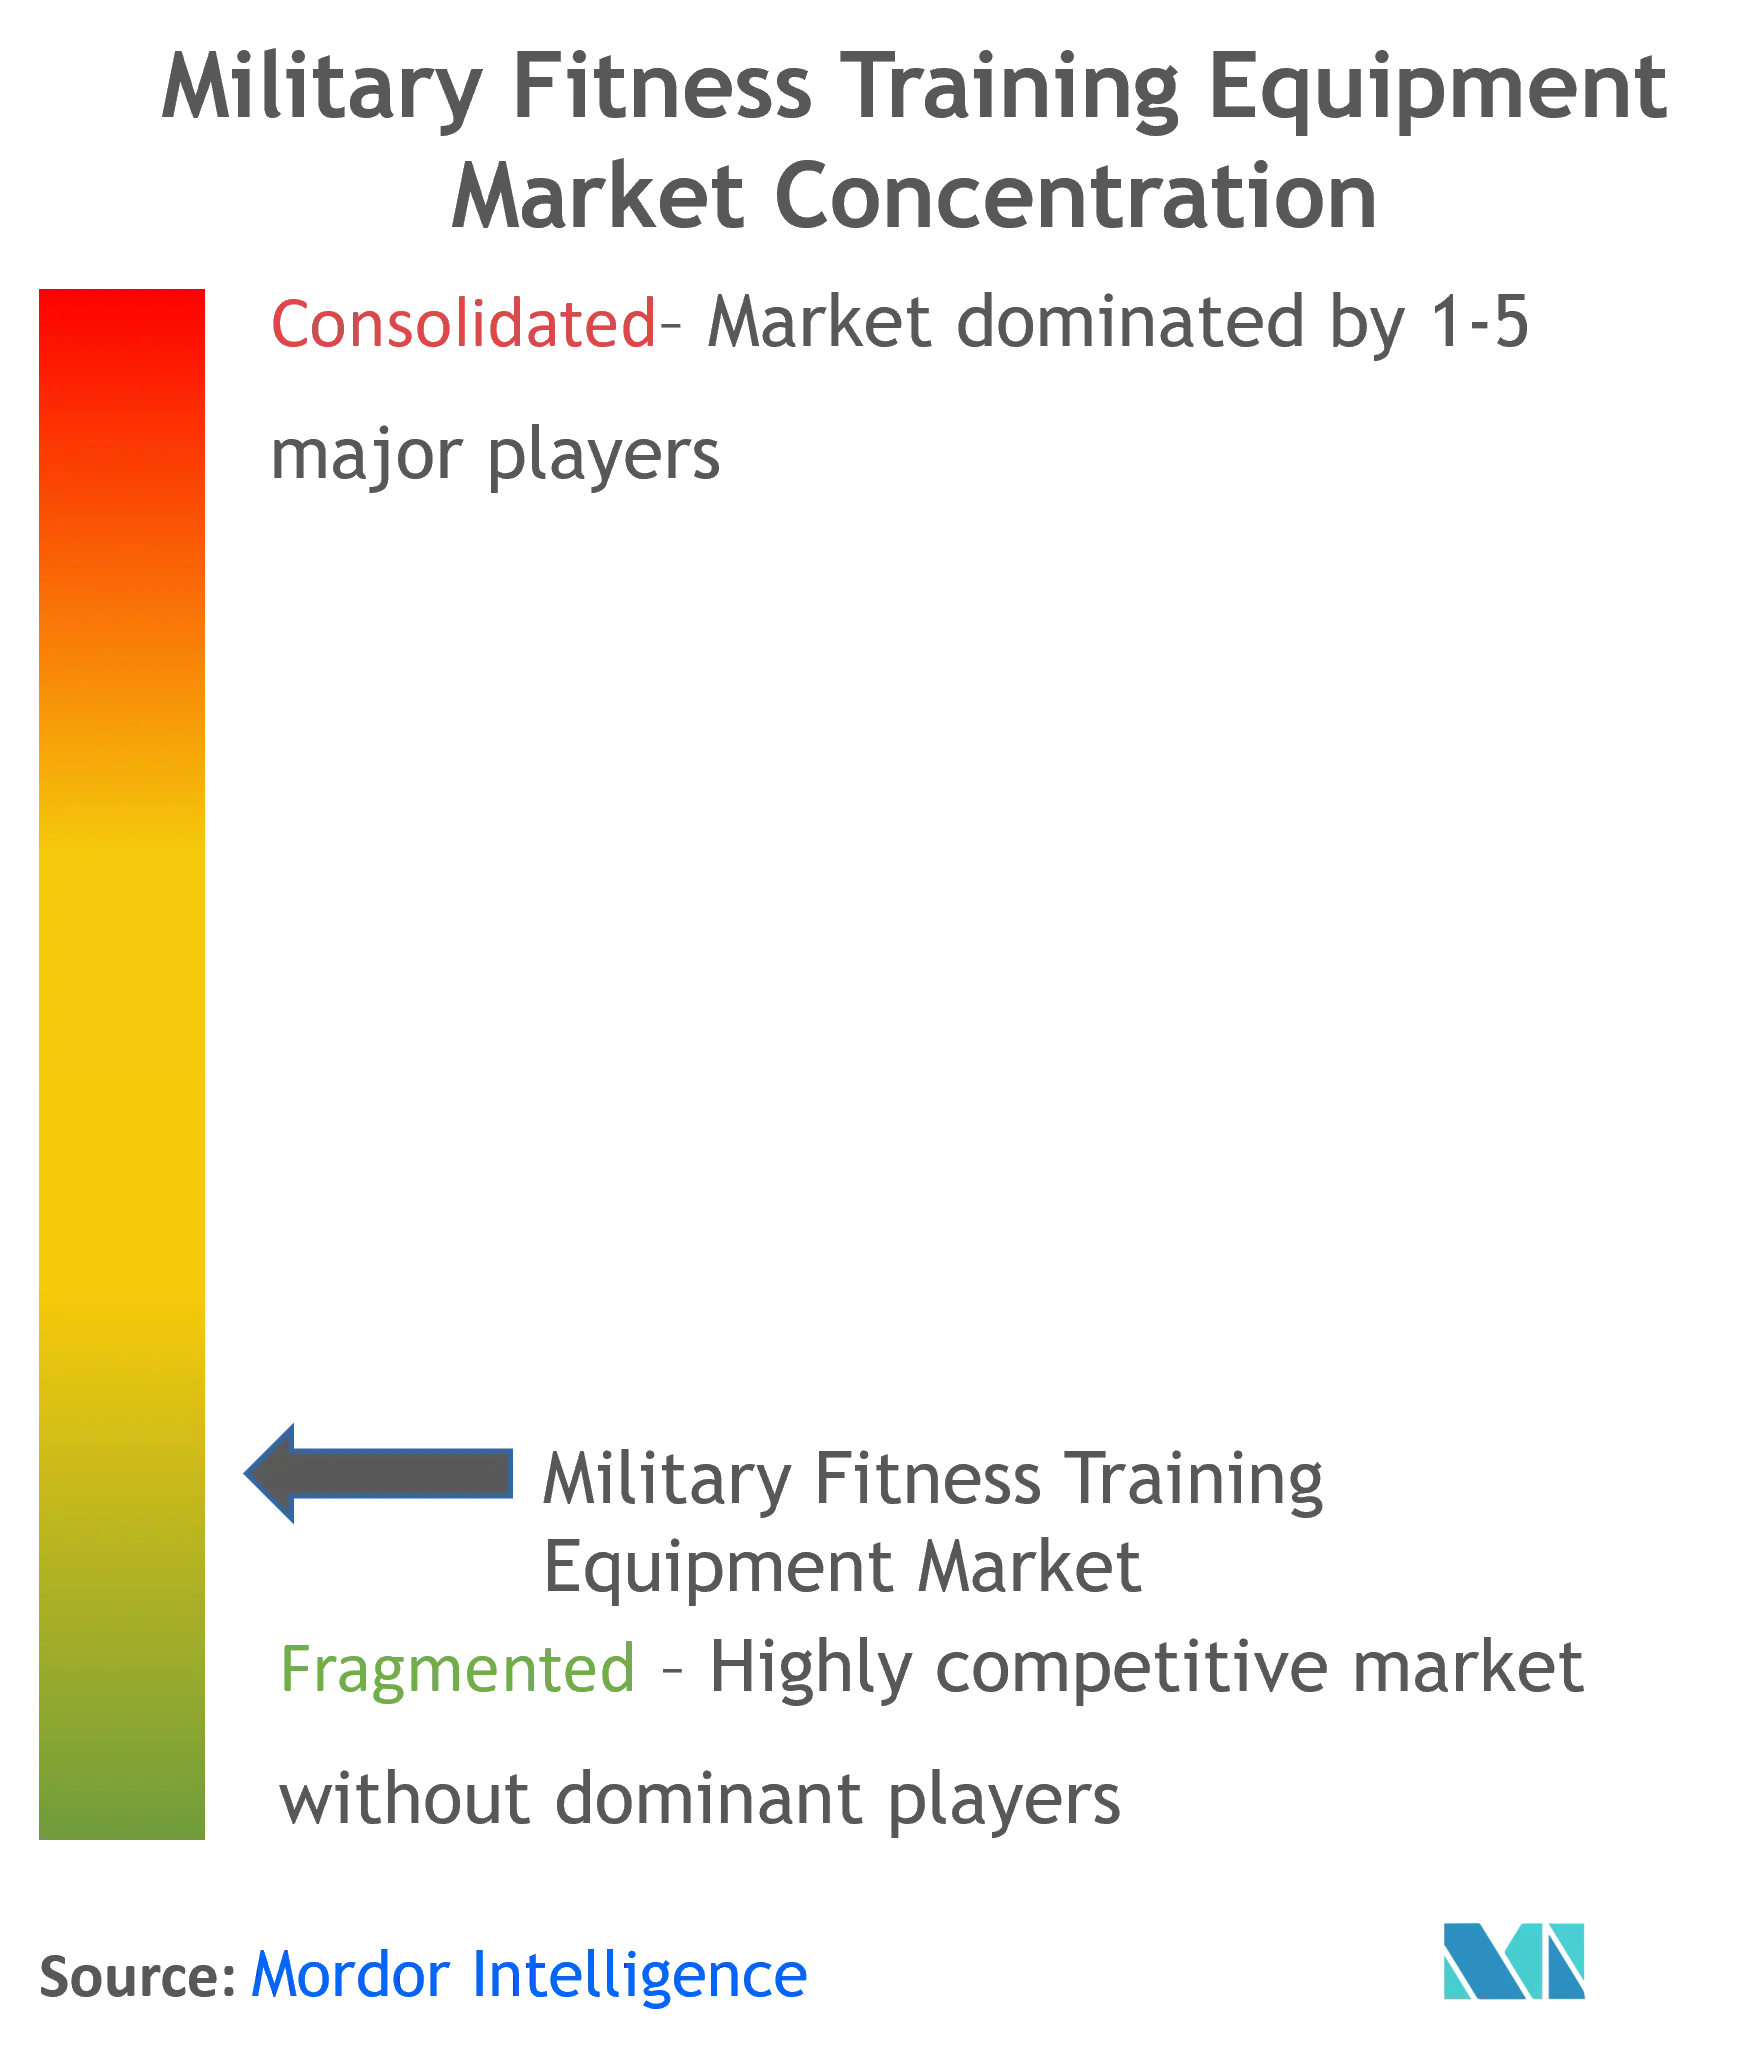 Military Fitness Training Equipment Market Concentration